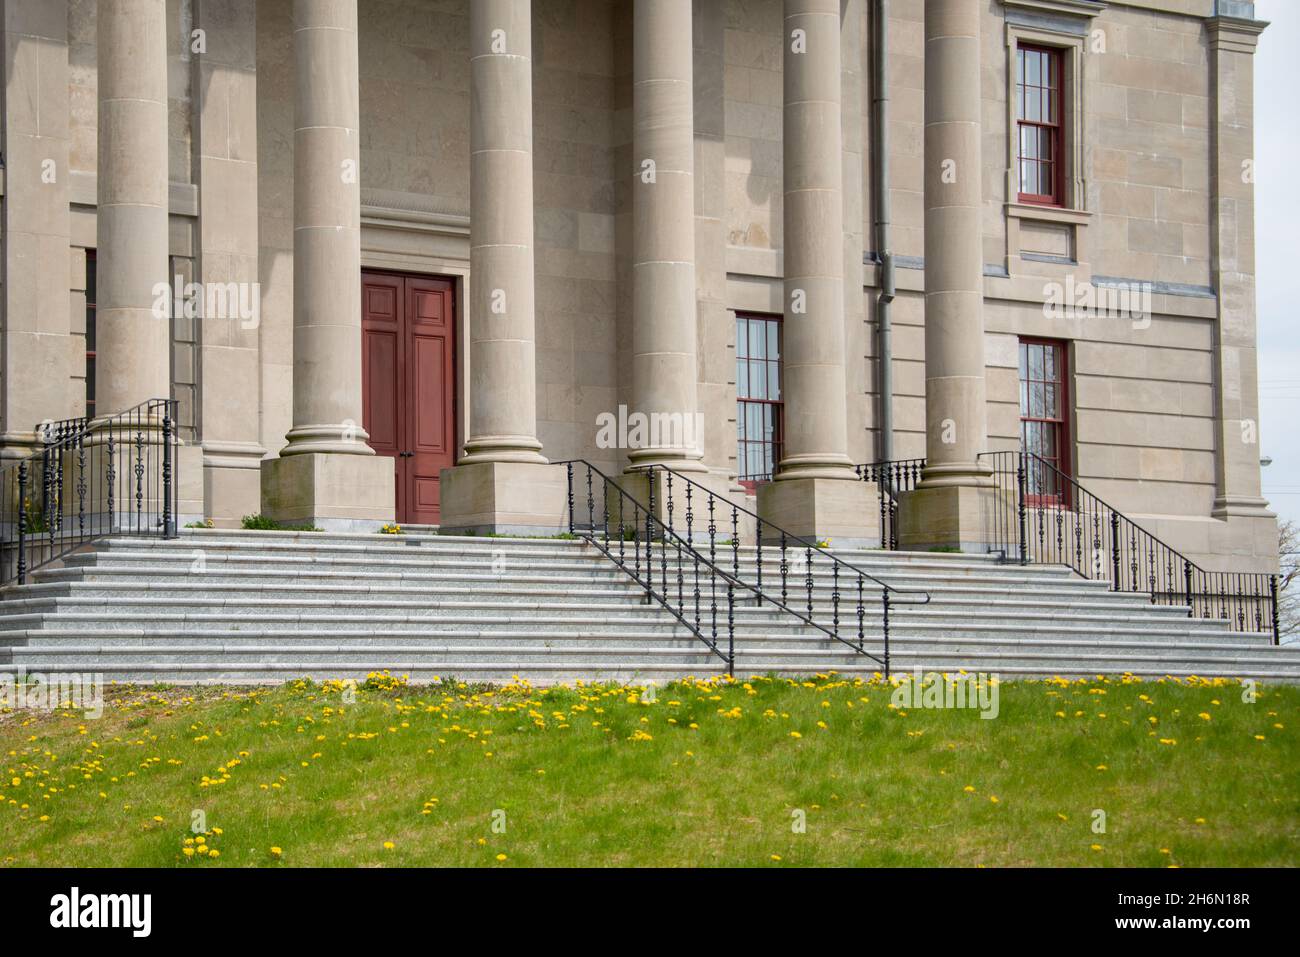 The exterior facade of a historic government building with large vintage marble pillars or columns, red door, black rails, and a brick entrance Stock Photo